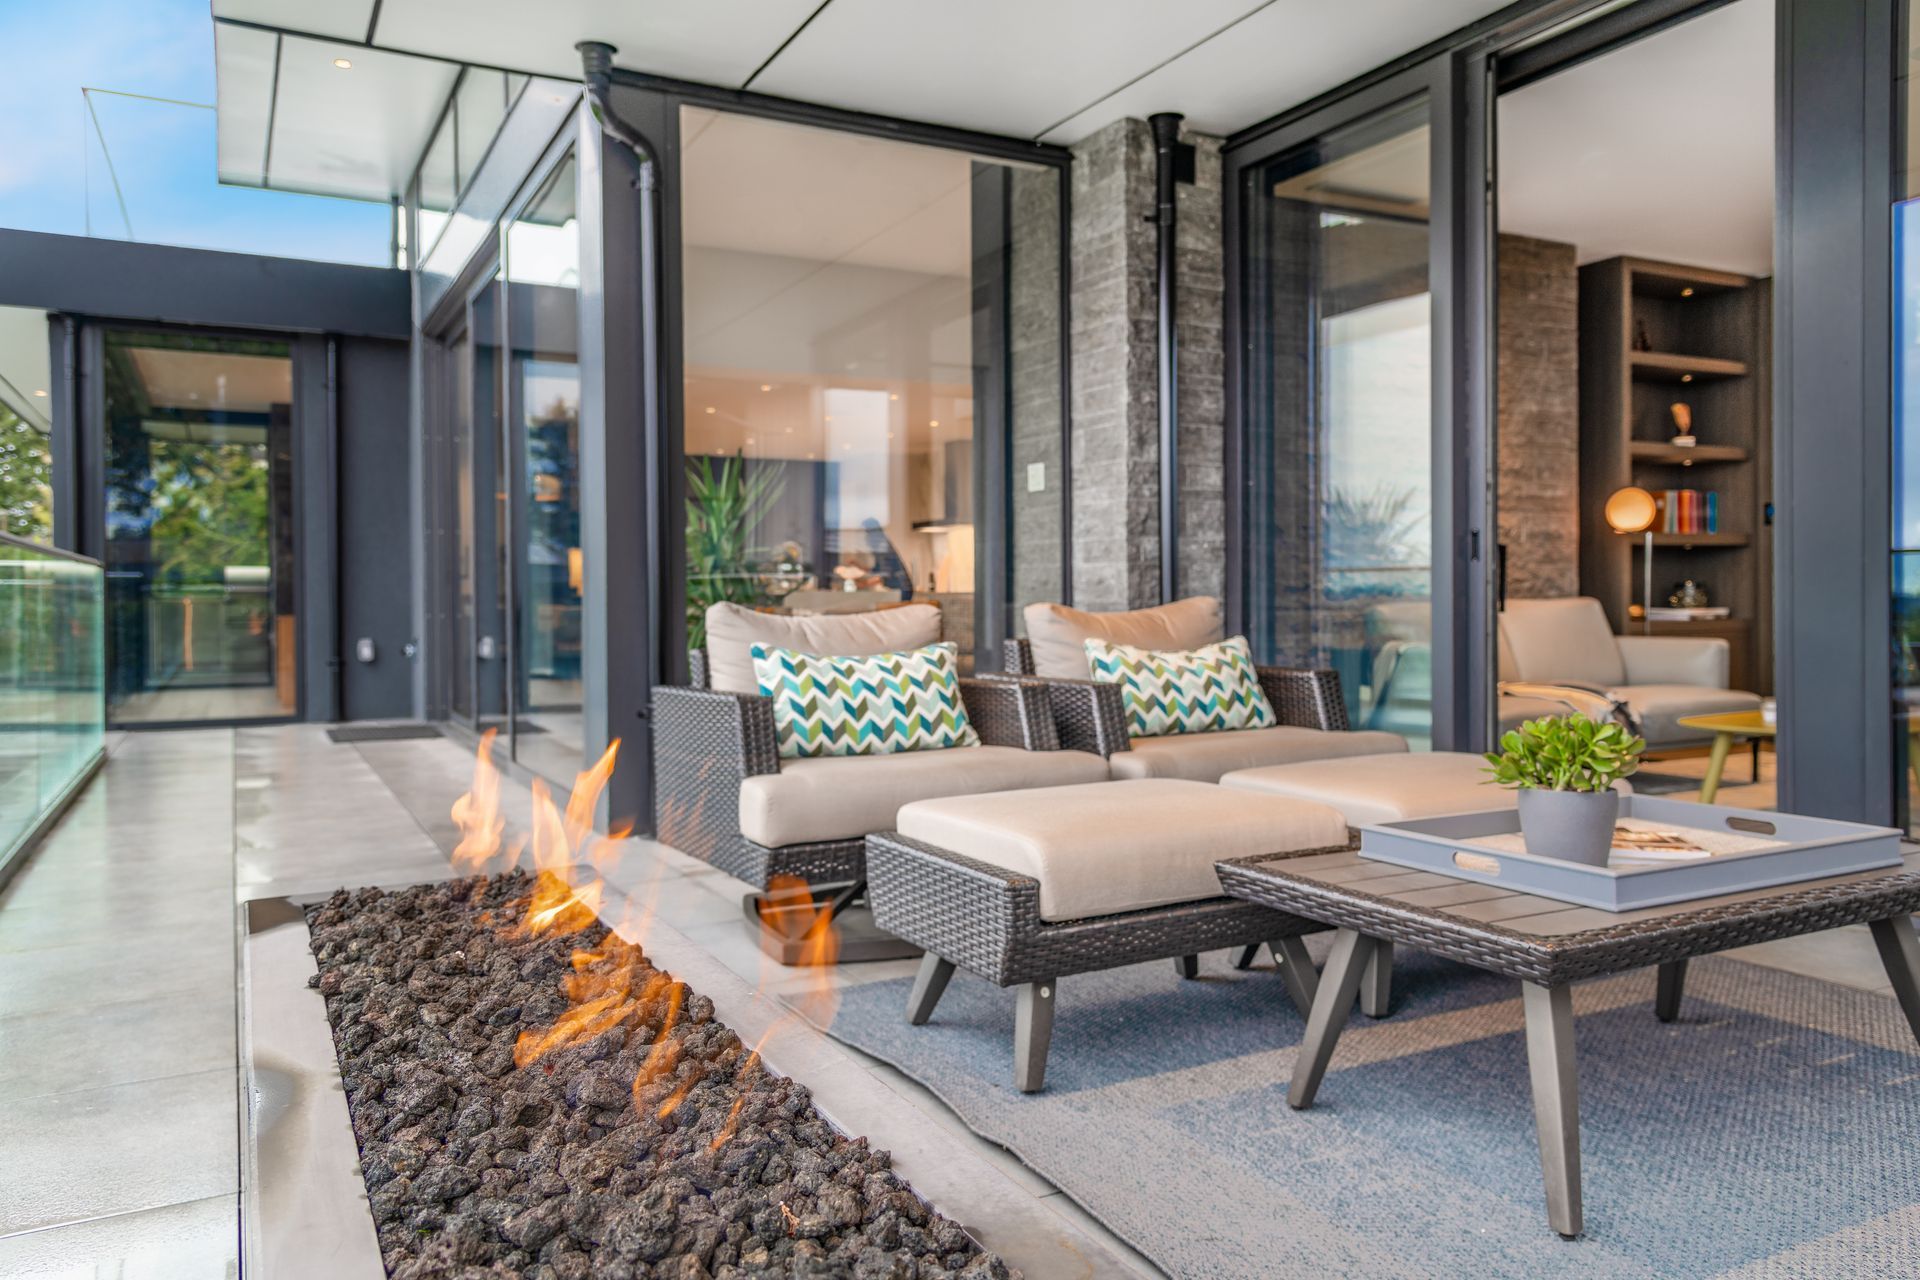 Outdoor Living Room With Fire Place